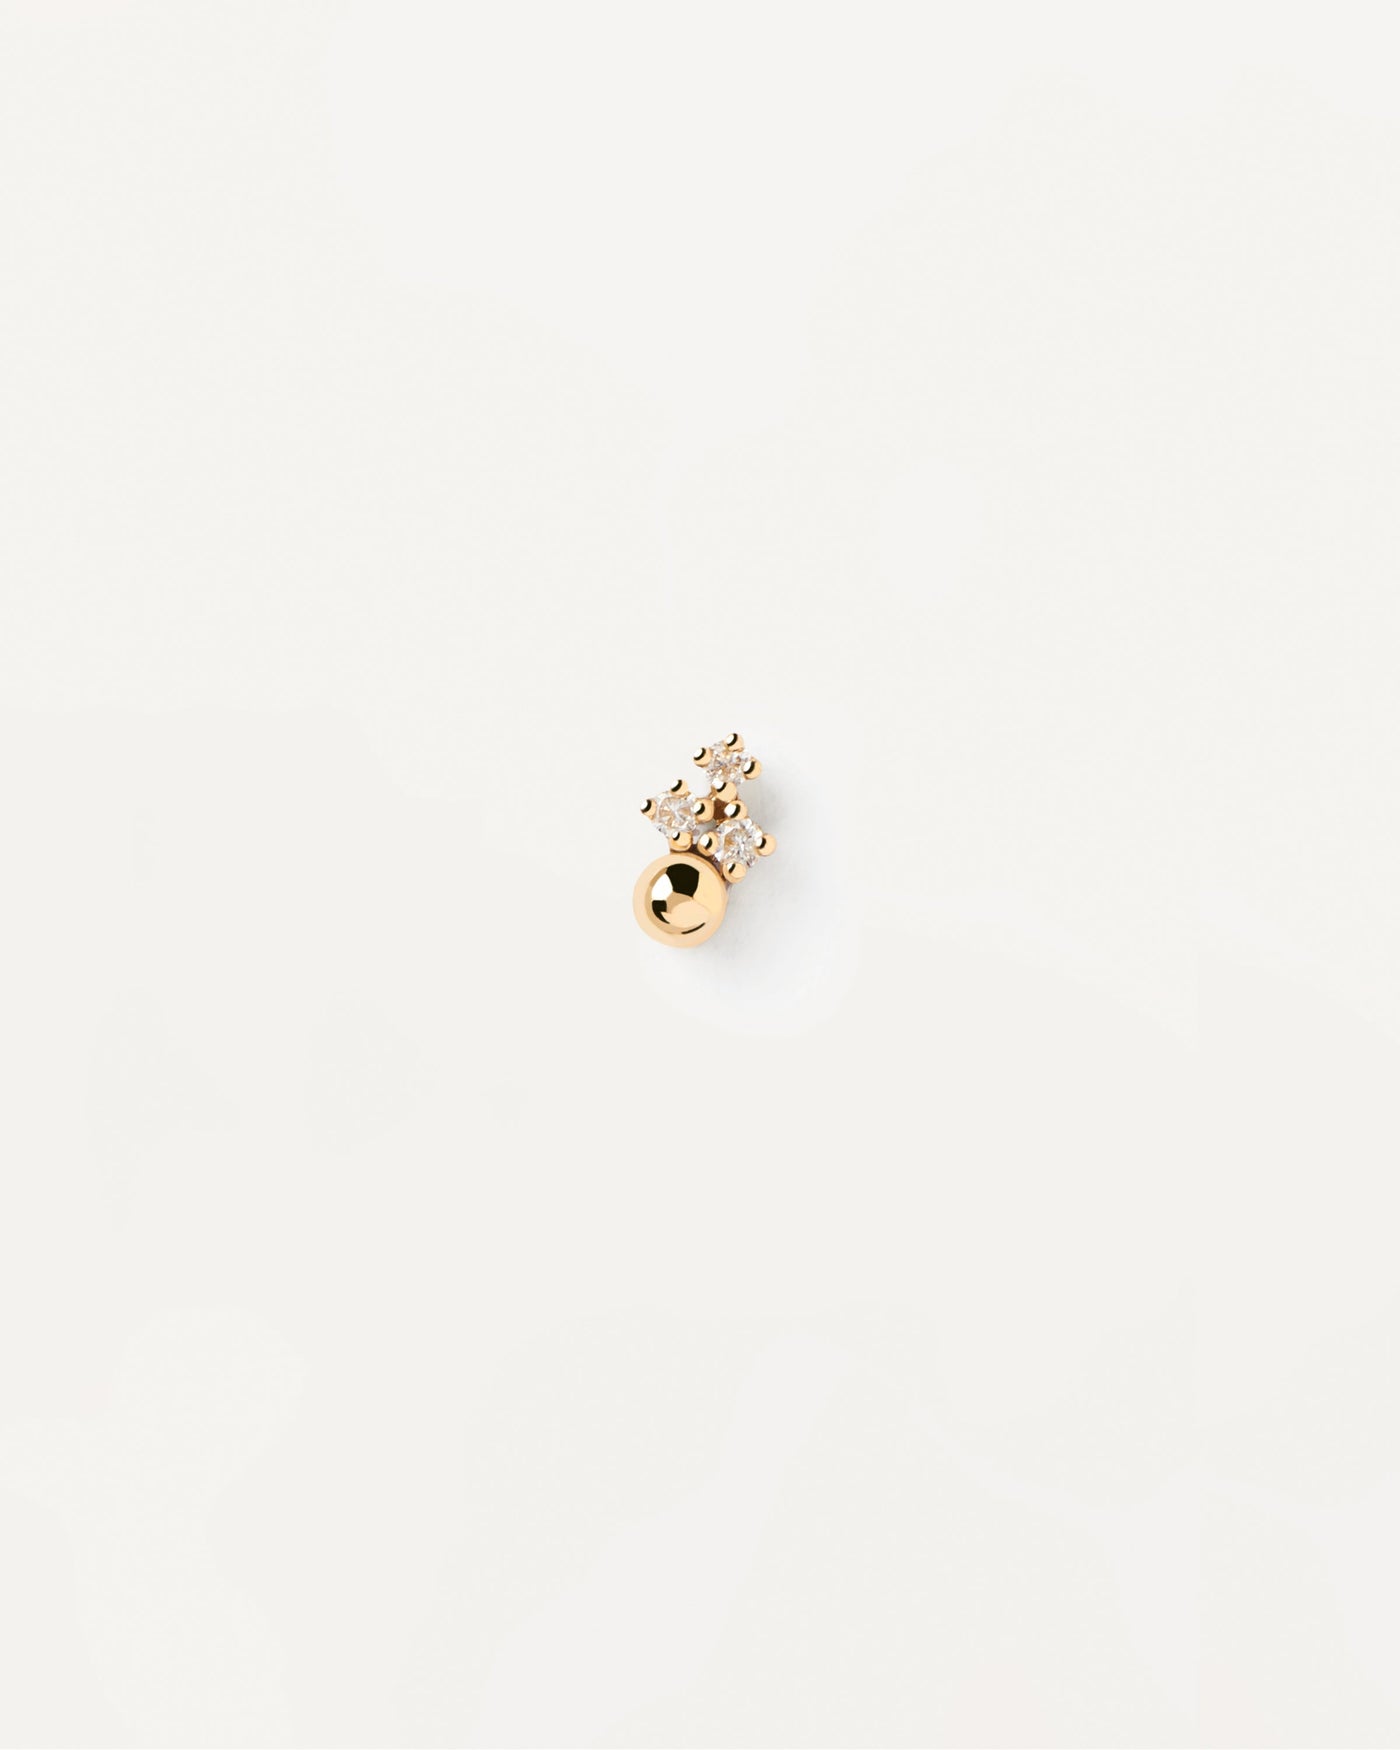 2023 Selection | Diamonds and gold Blake Single Earring. Solid yellow gold ear piercing with solid gold ball & dainty diamonds of 0.01 carat. Get the latest arrival from PDPAOLA. Place your order safely and get this Best Seller. Free Shipping.